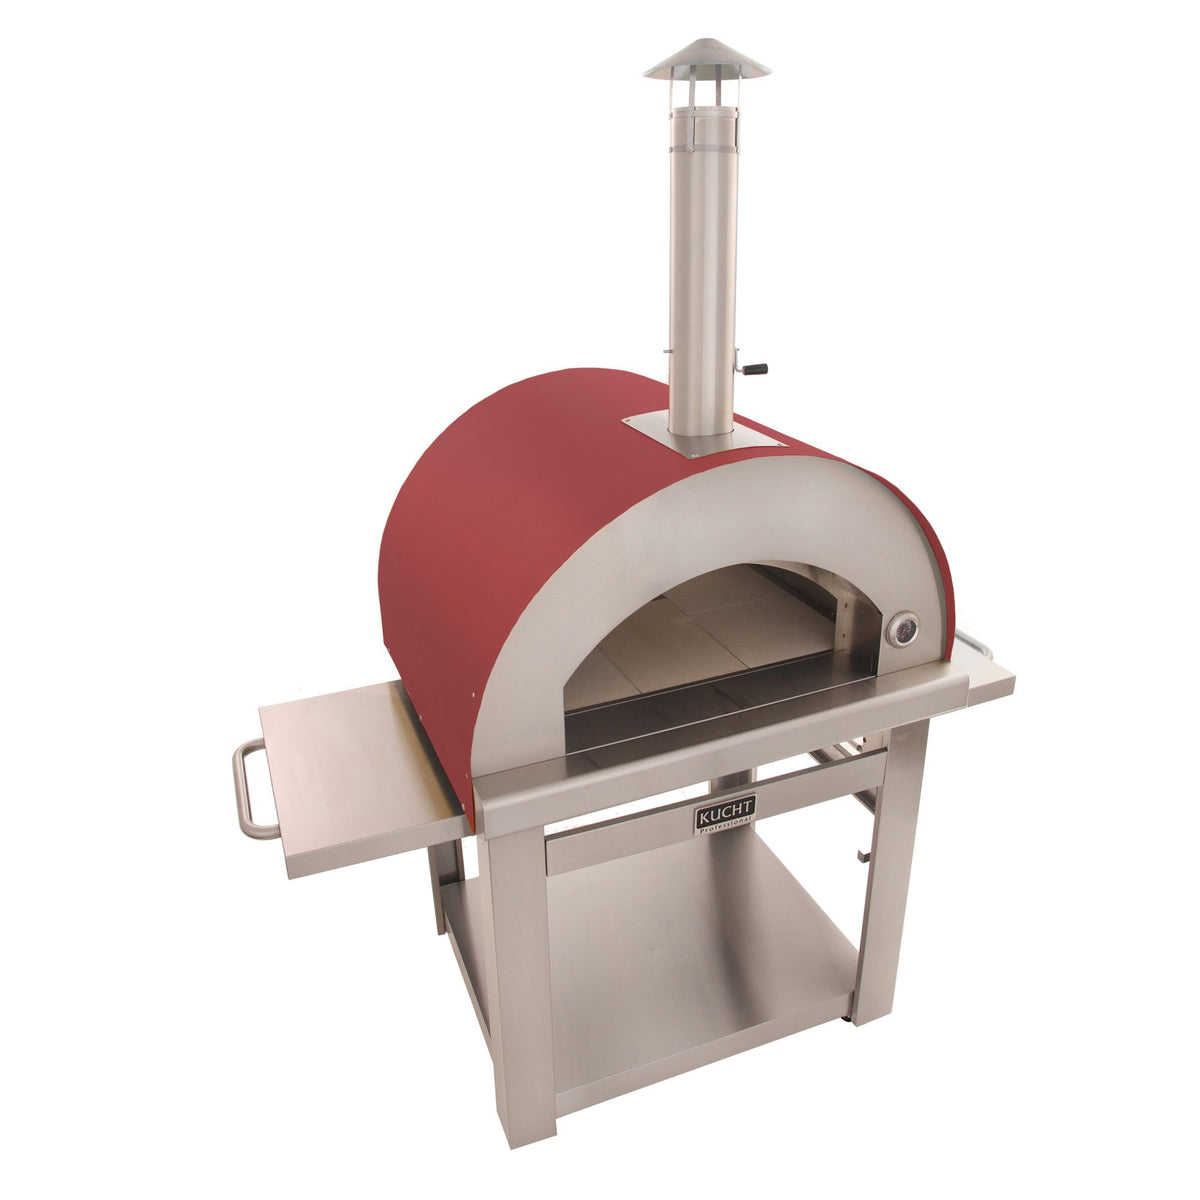 KUCHT Venice Wood Fired Outdoor Pizza Oven